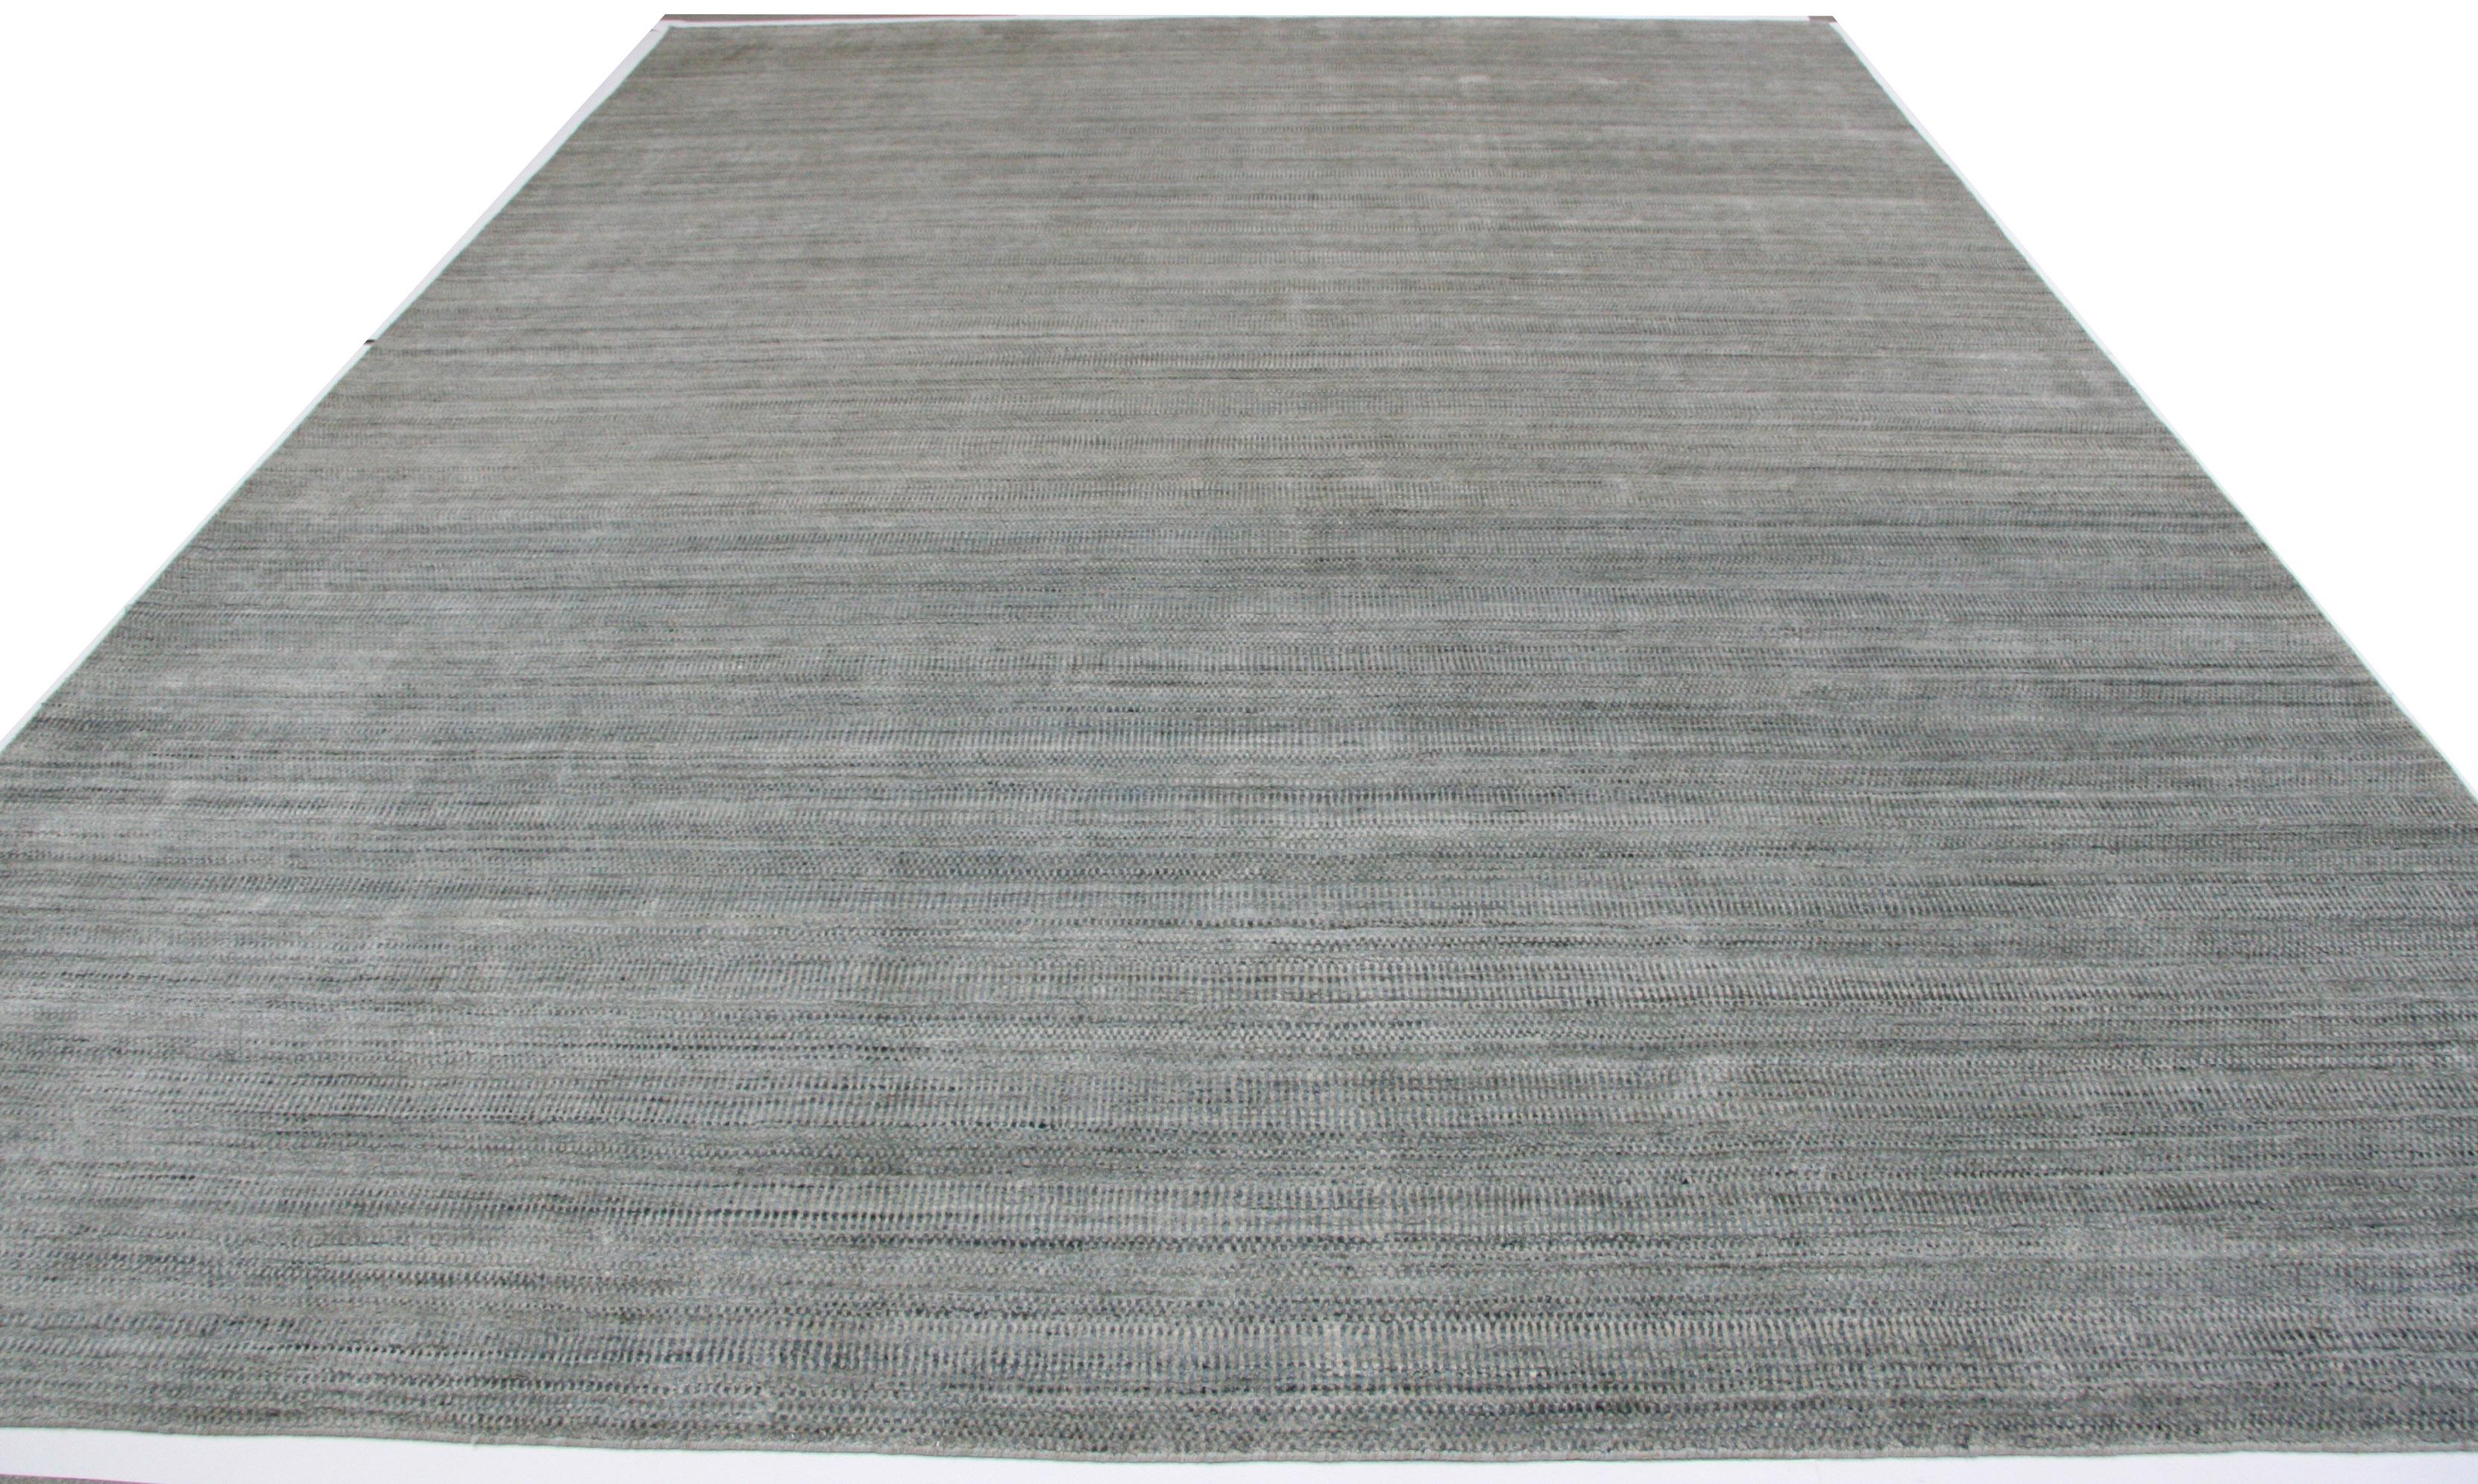 Create a calming atmosphere in any space with this cool blue and beige variation of the popular Zen Collection rugs. Wool/viscose blend for comfort and durability. Hand knotted in India. Made using natural vegetal dyes. 

Additional sizes